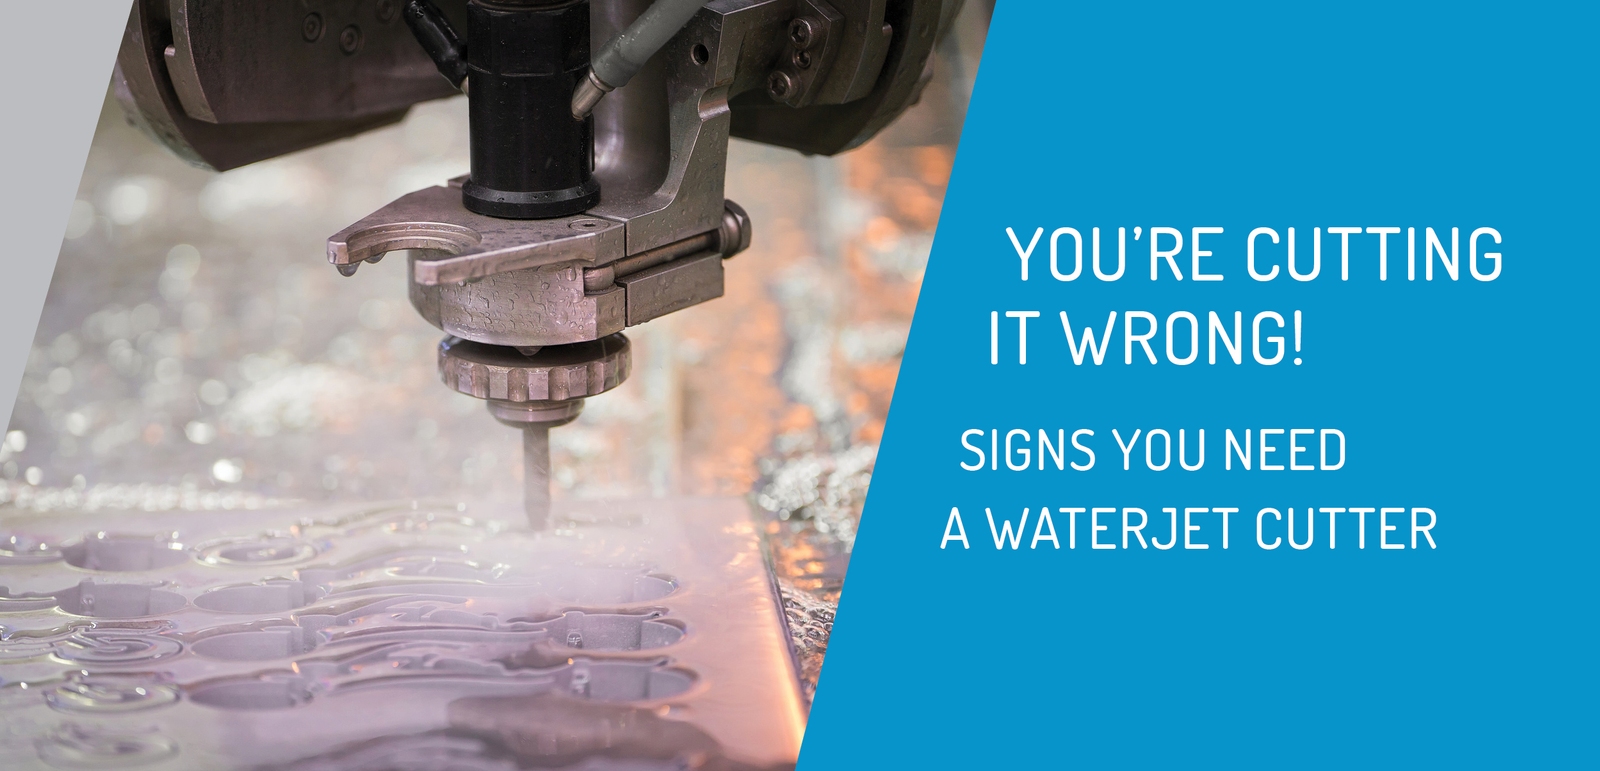 You’re Cutting it Wrong! Signs you Need a Waterjet